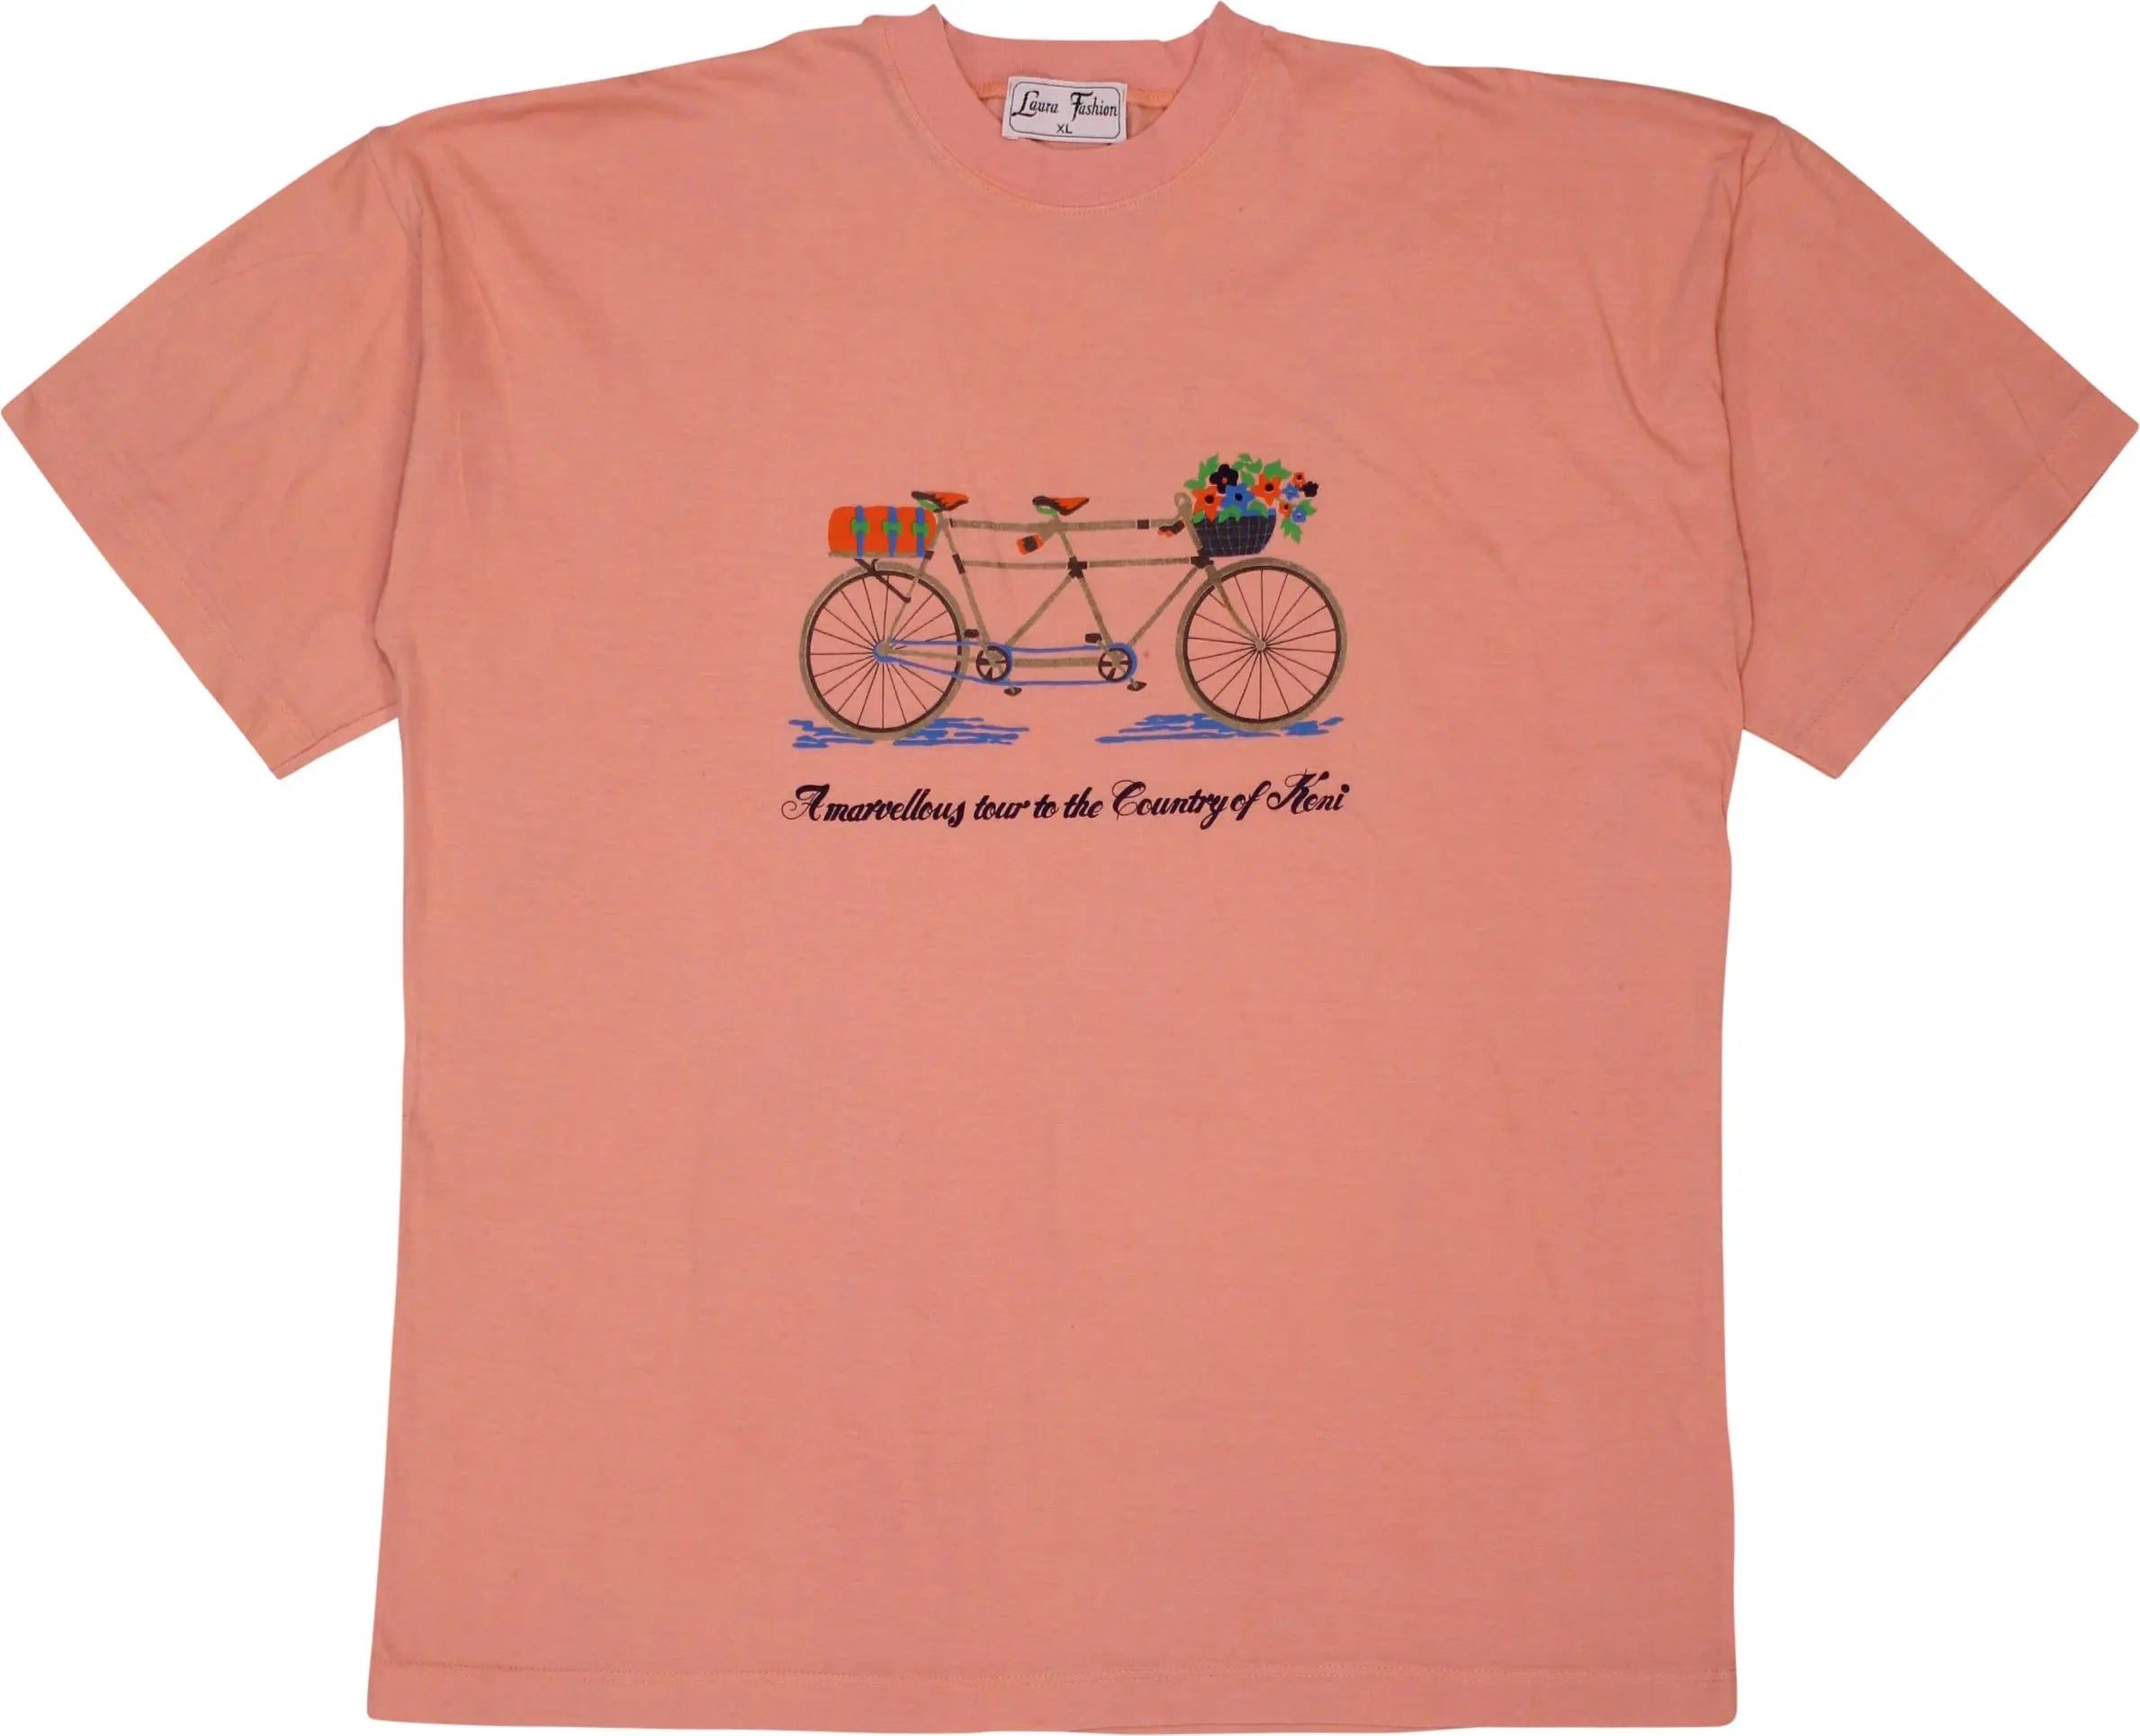 Laura Fashion - Pink Tandem Bike T-shirt- ThriftTale.com - Vintage and second handclothing